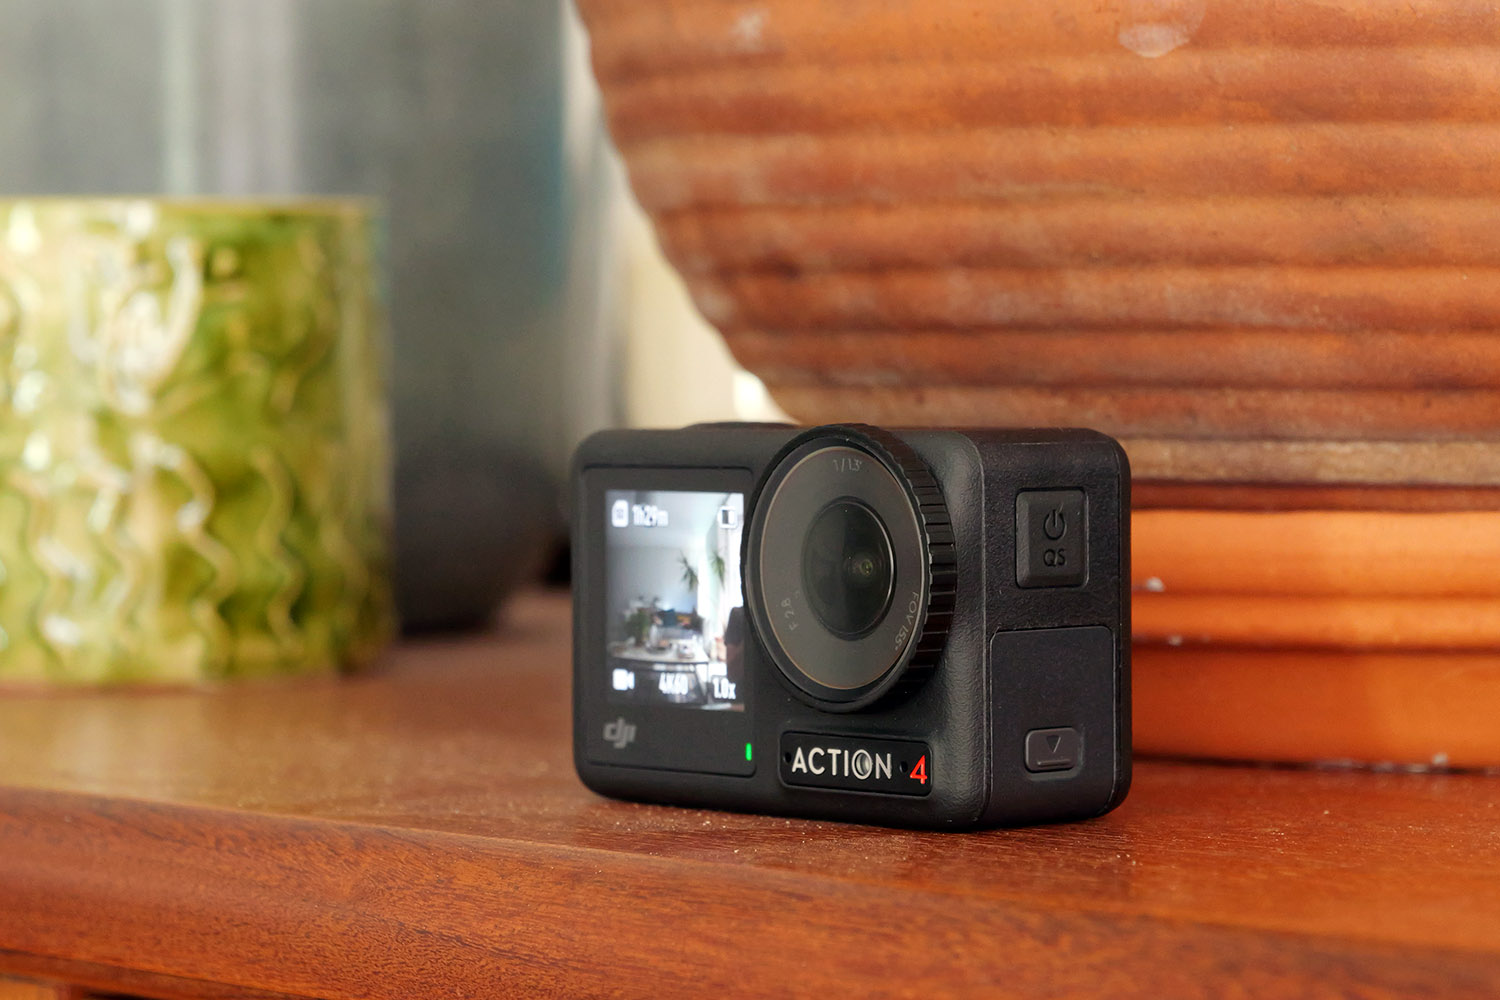 DJI Osmo Action 4 Review: Finally, a Worthy GoPro Competitor